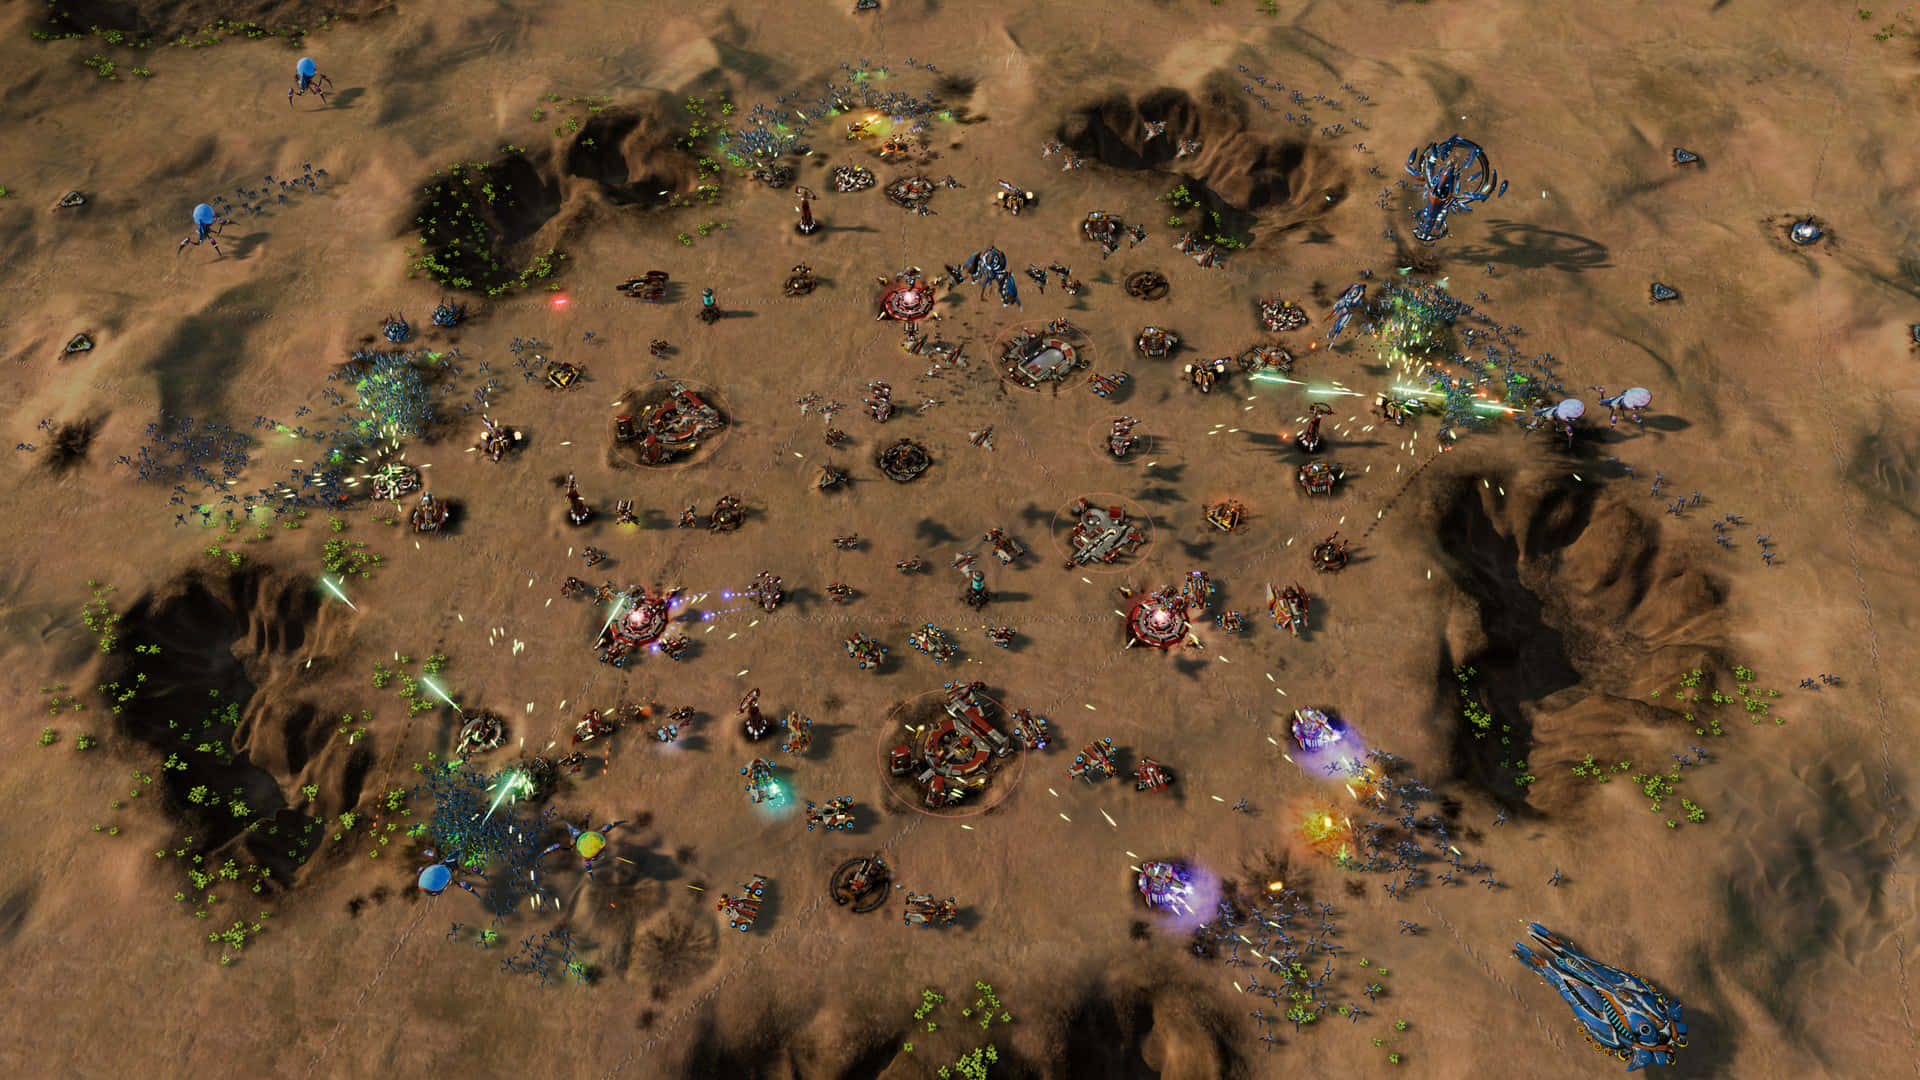 Image  Engage in Unreal Scale Warfare in HD Ashes of the Singularity Escalation